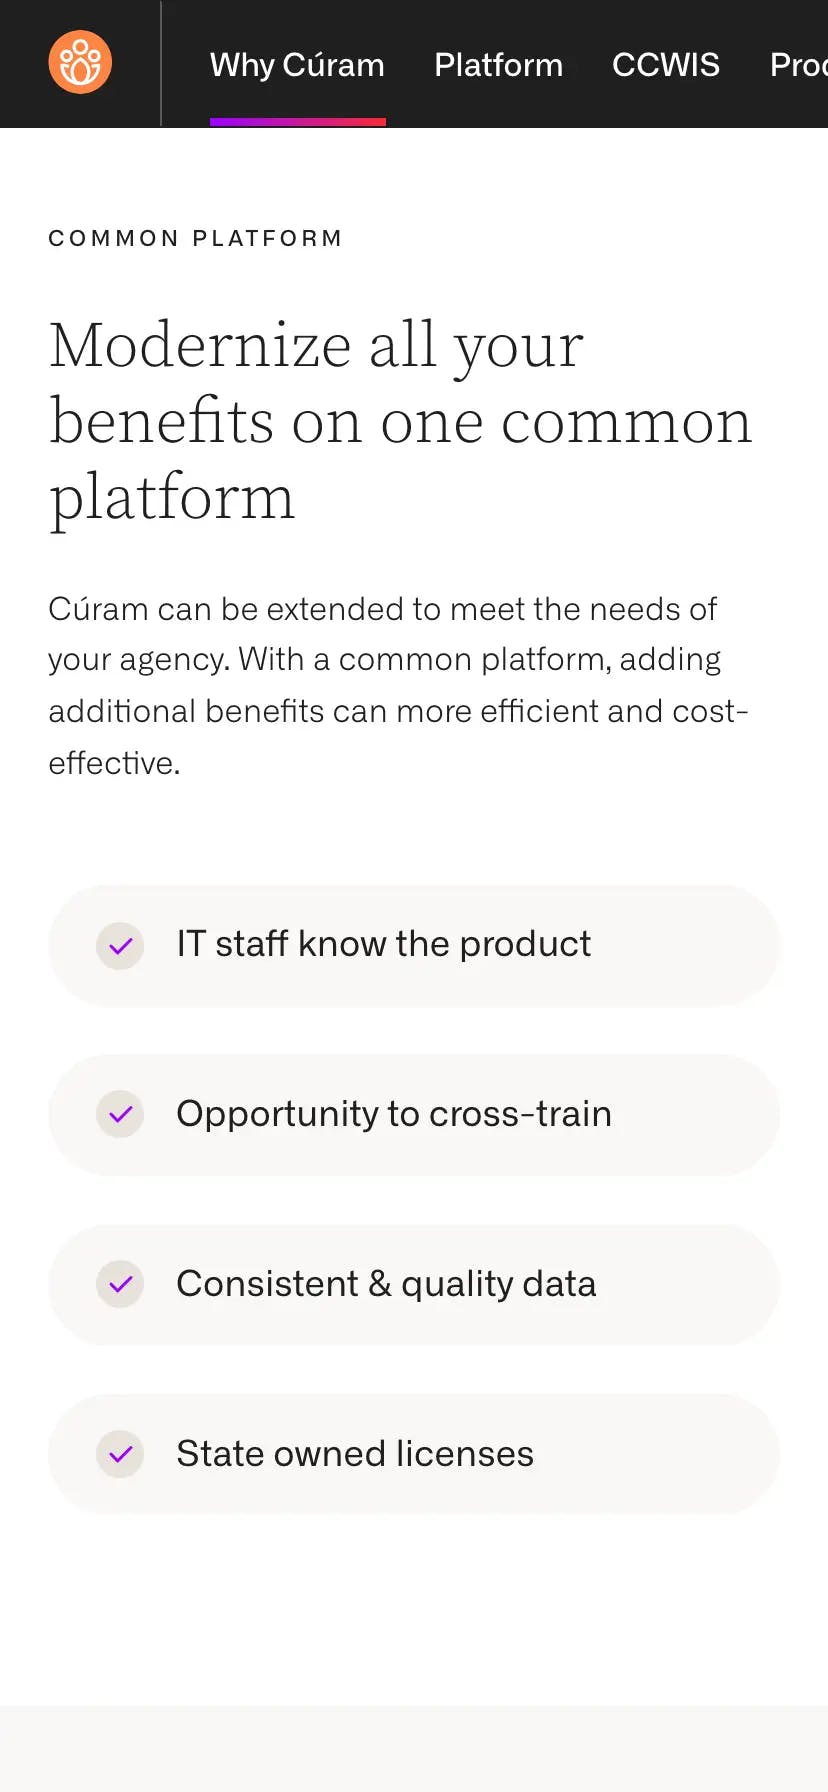 creenshot of the mobile view of a Product Campaign's overview section